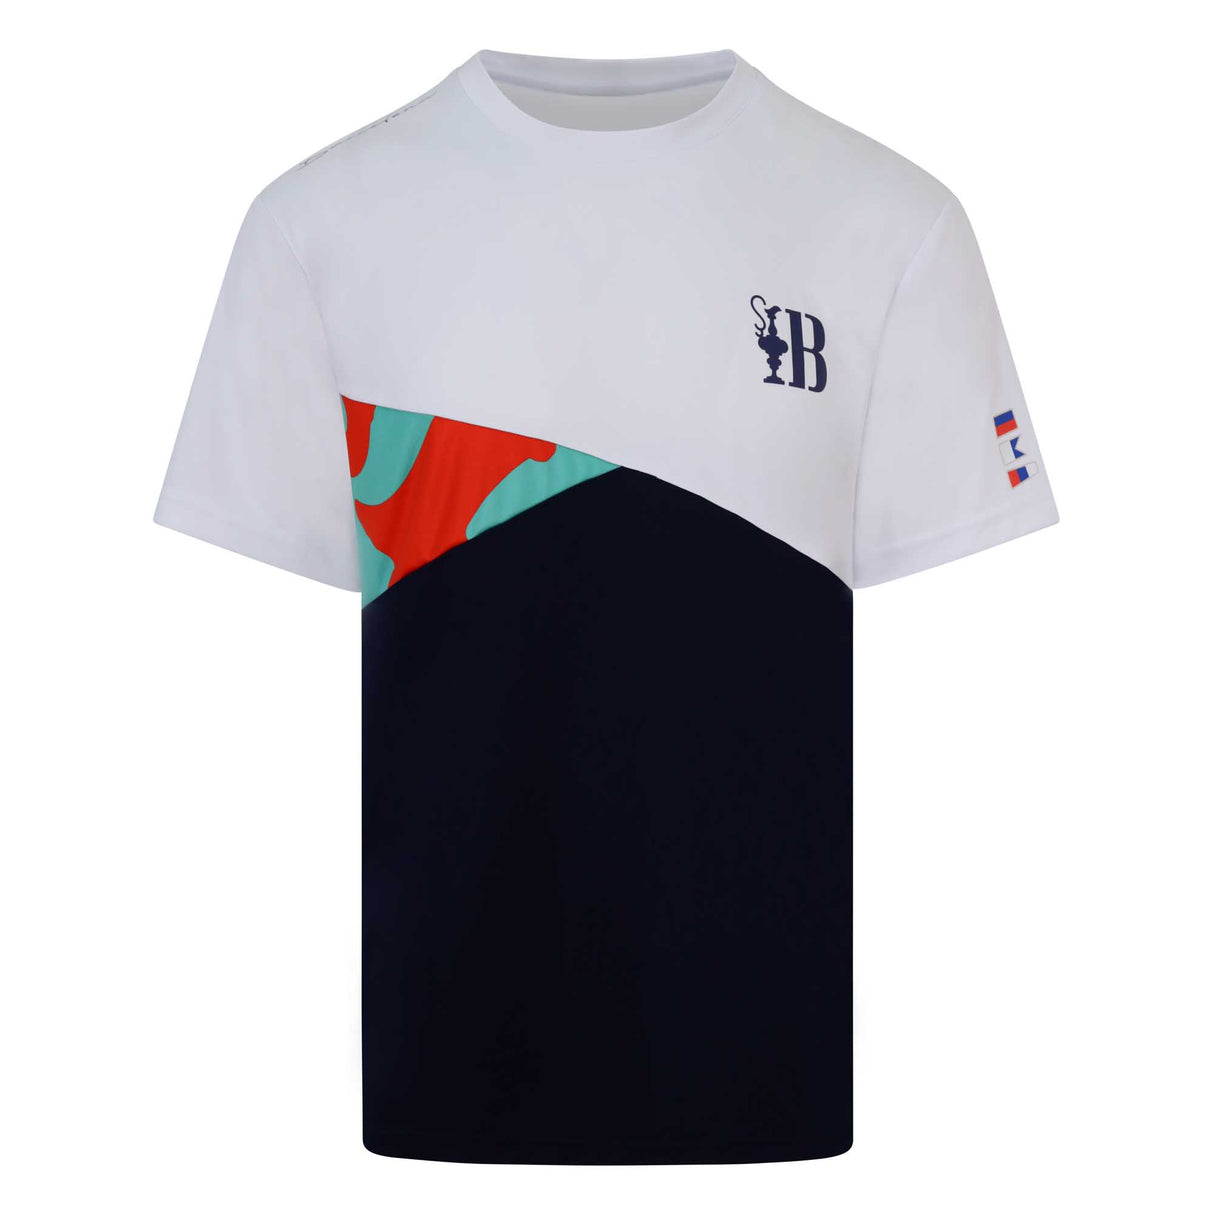 37th America's Cup Cut And Sew T-Shirt